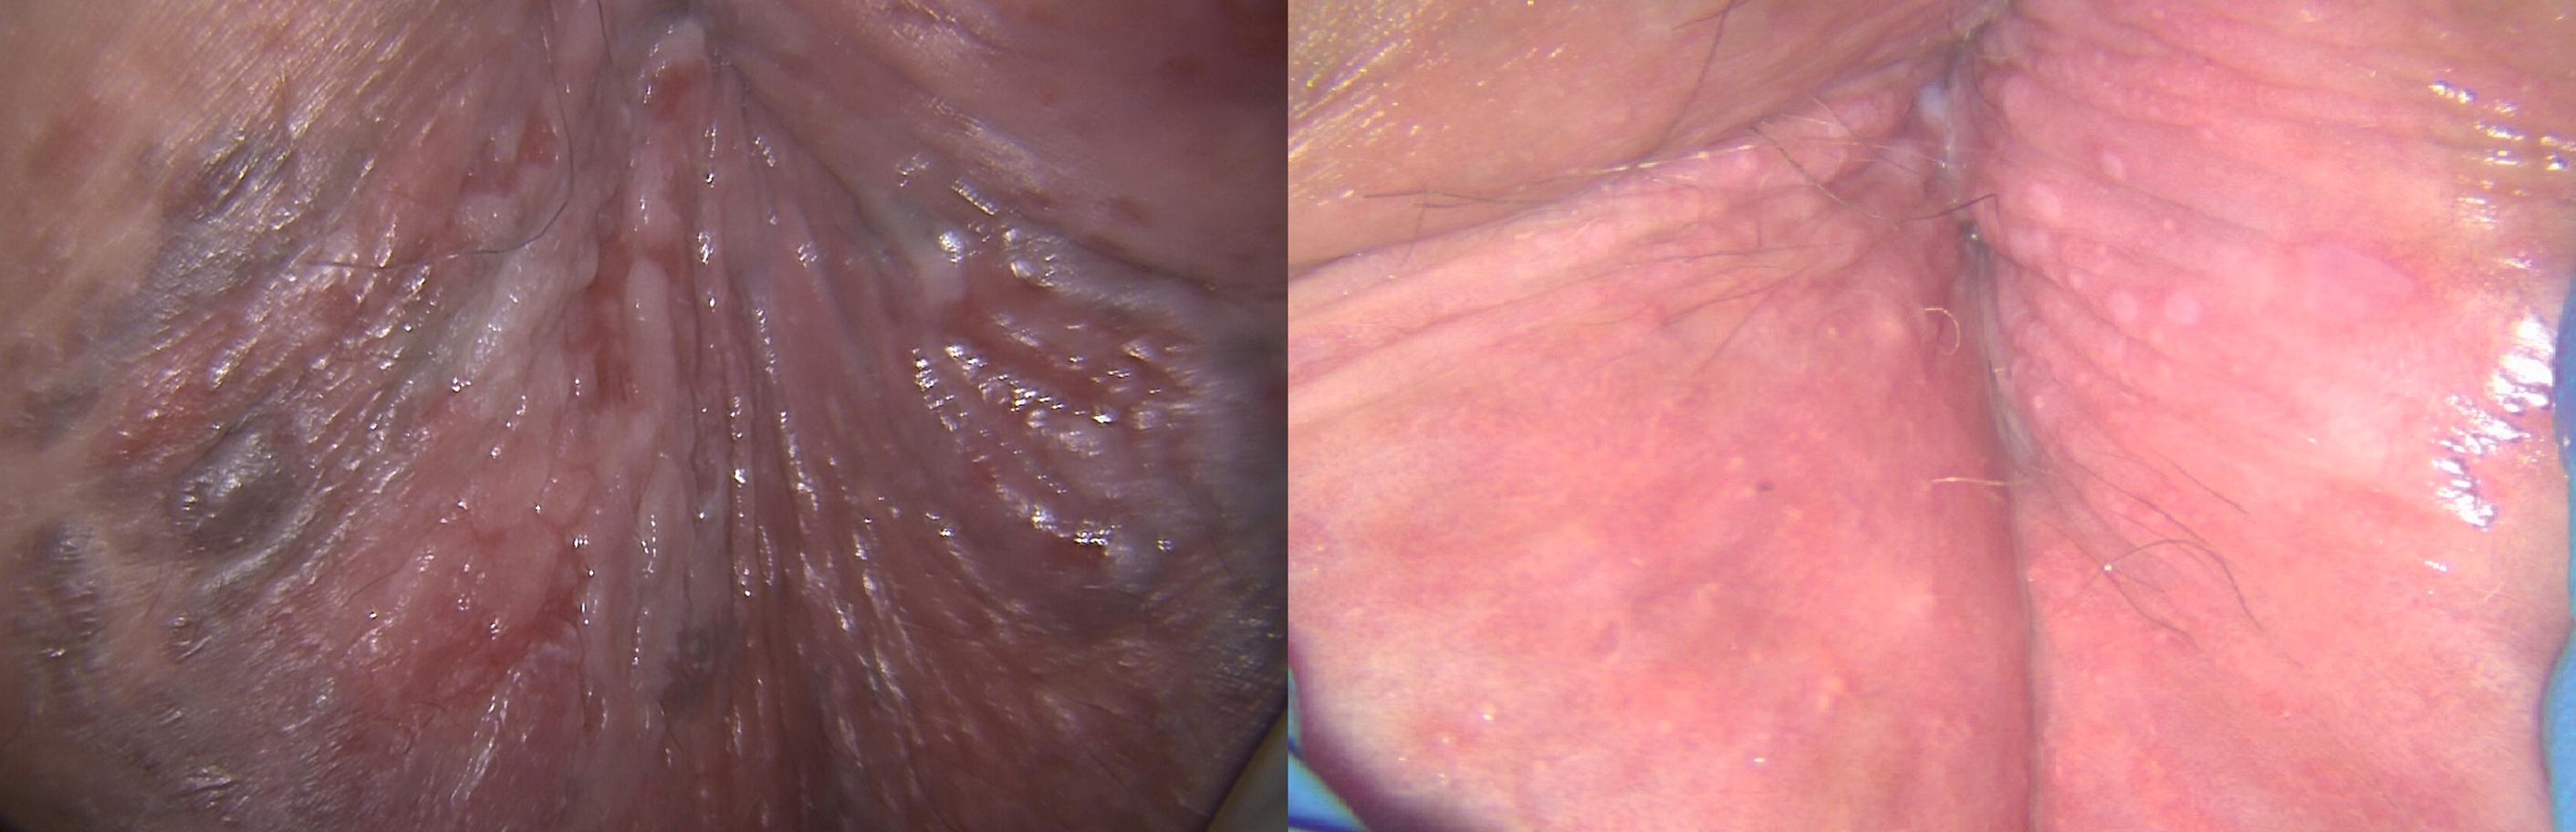 Figure 8.6, Extensive perianal high-grade intra-epithelial lesions (HSIL) field change with focal invasion and appearance after ablation and excision 8 months later.